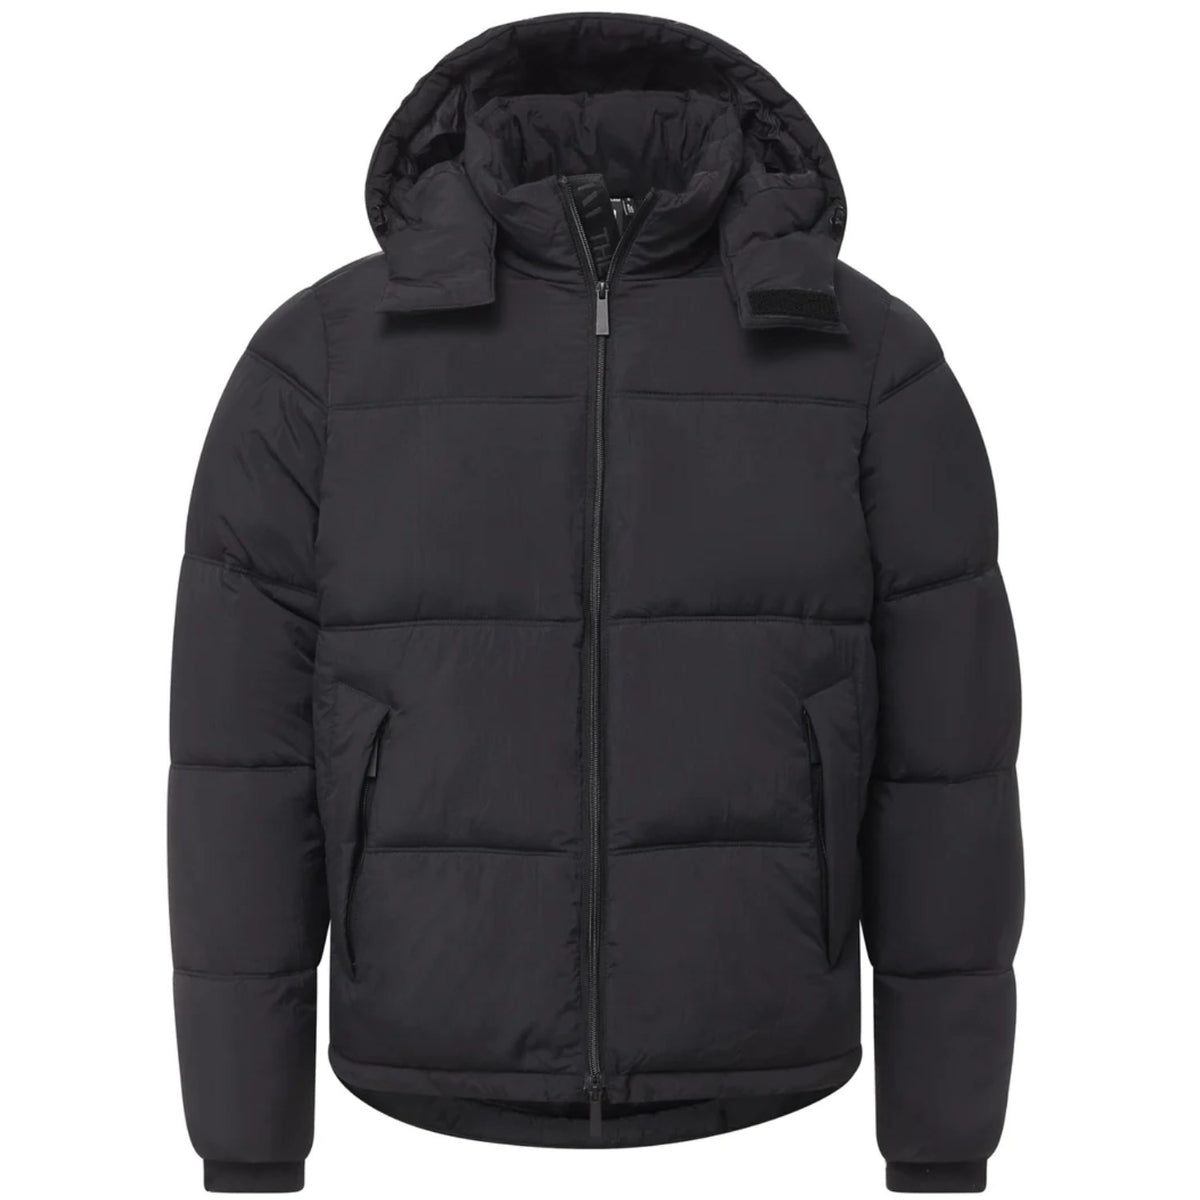 The Very Warm - Puffer Jacket - Black Polyfilled